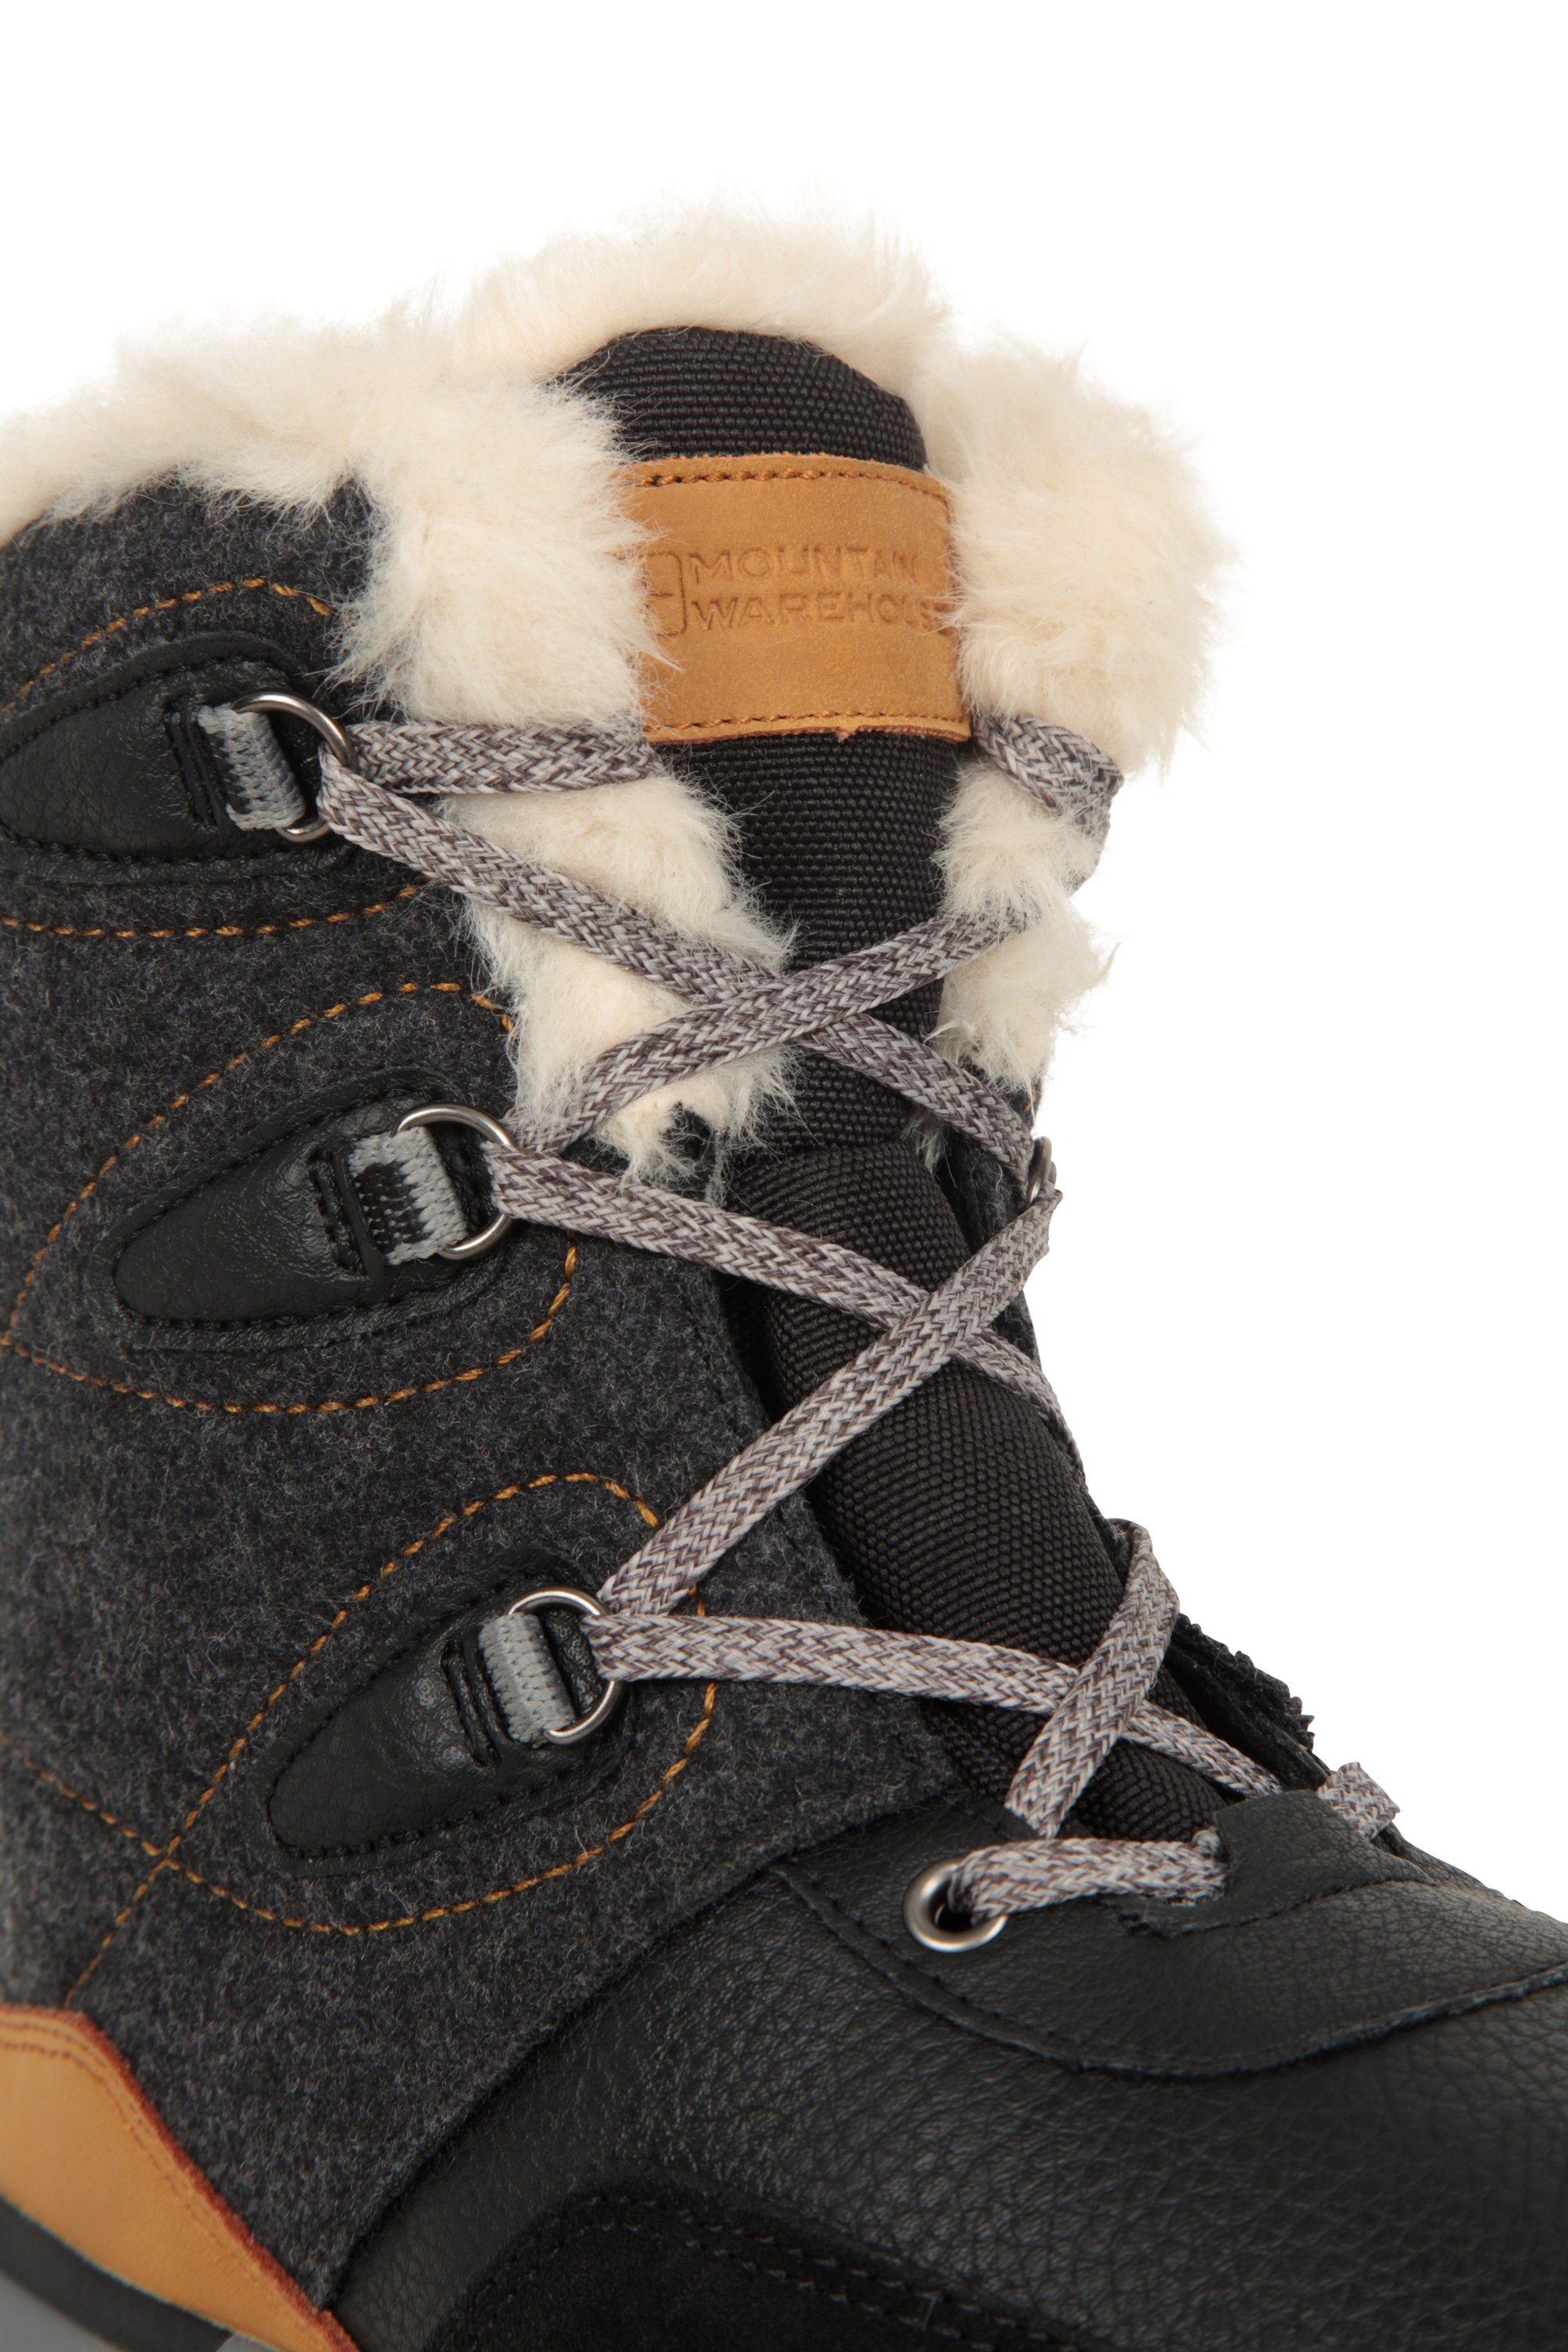 Ice Crystal Womens Waterproof Snow Boots